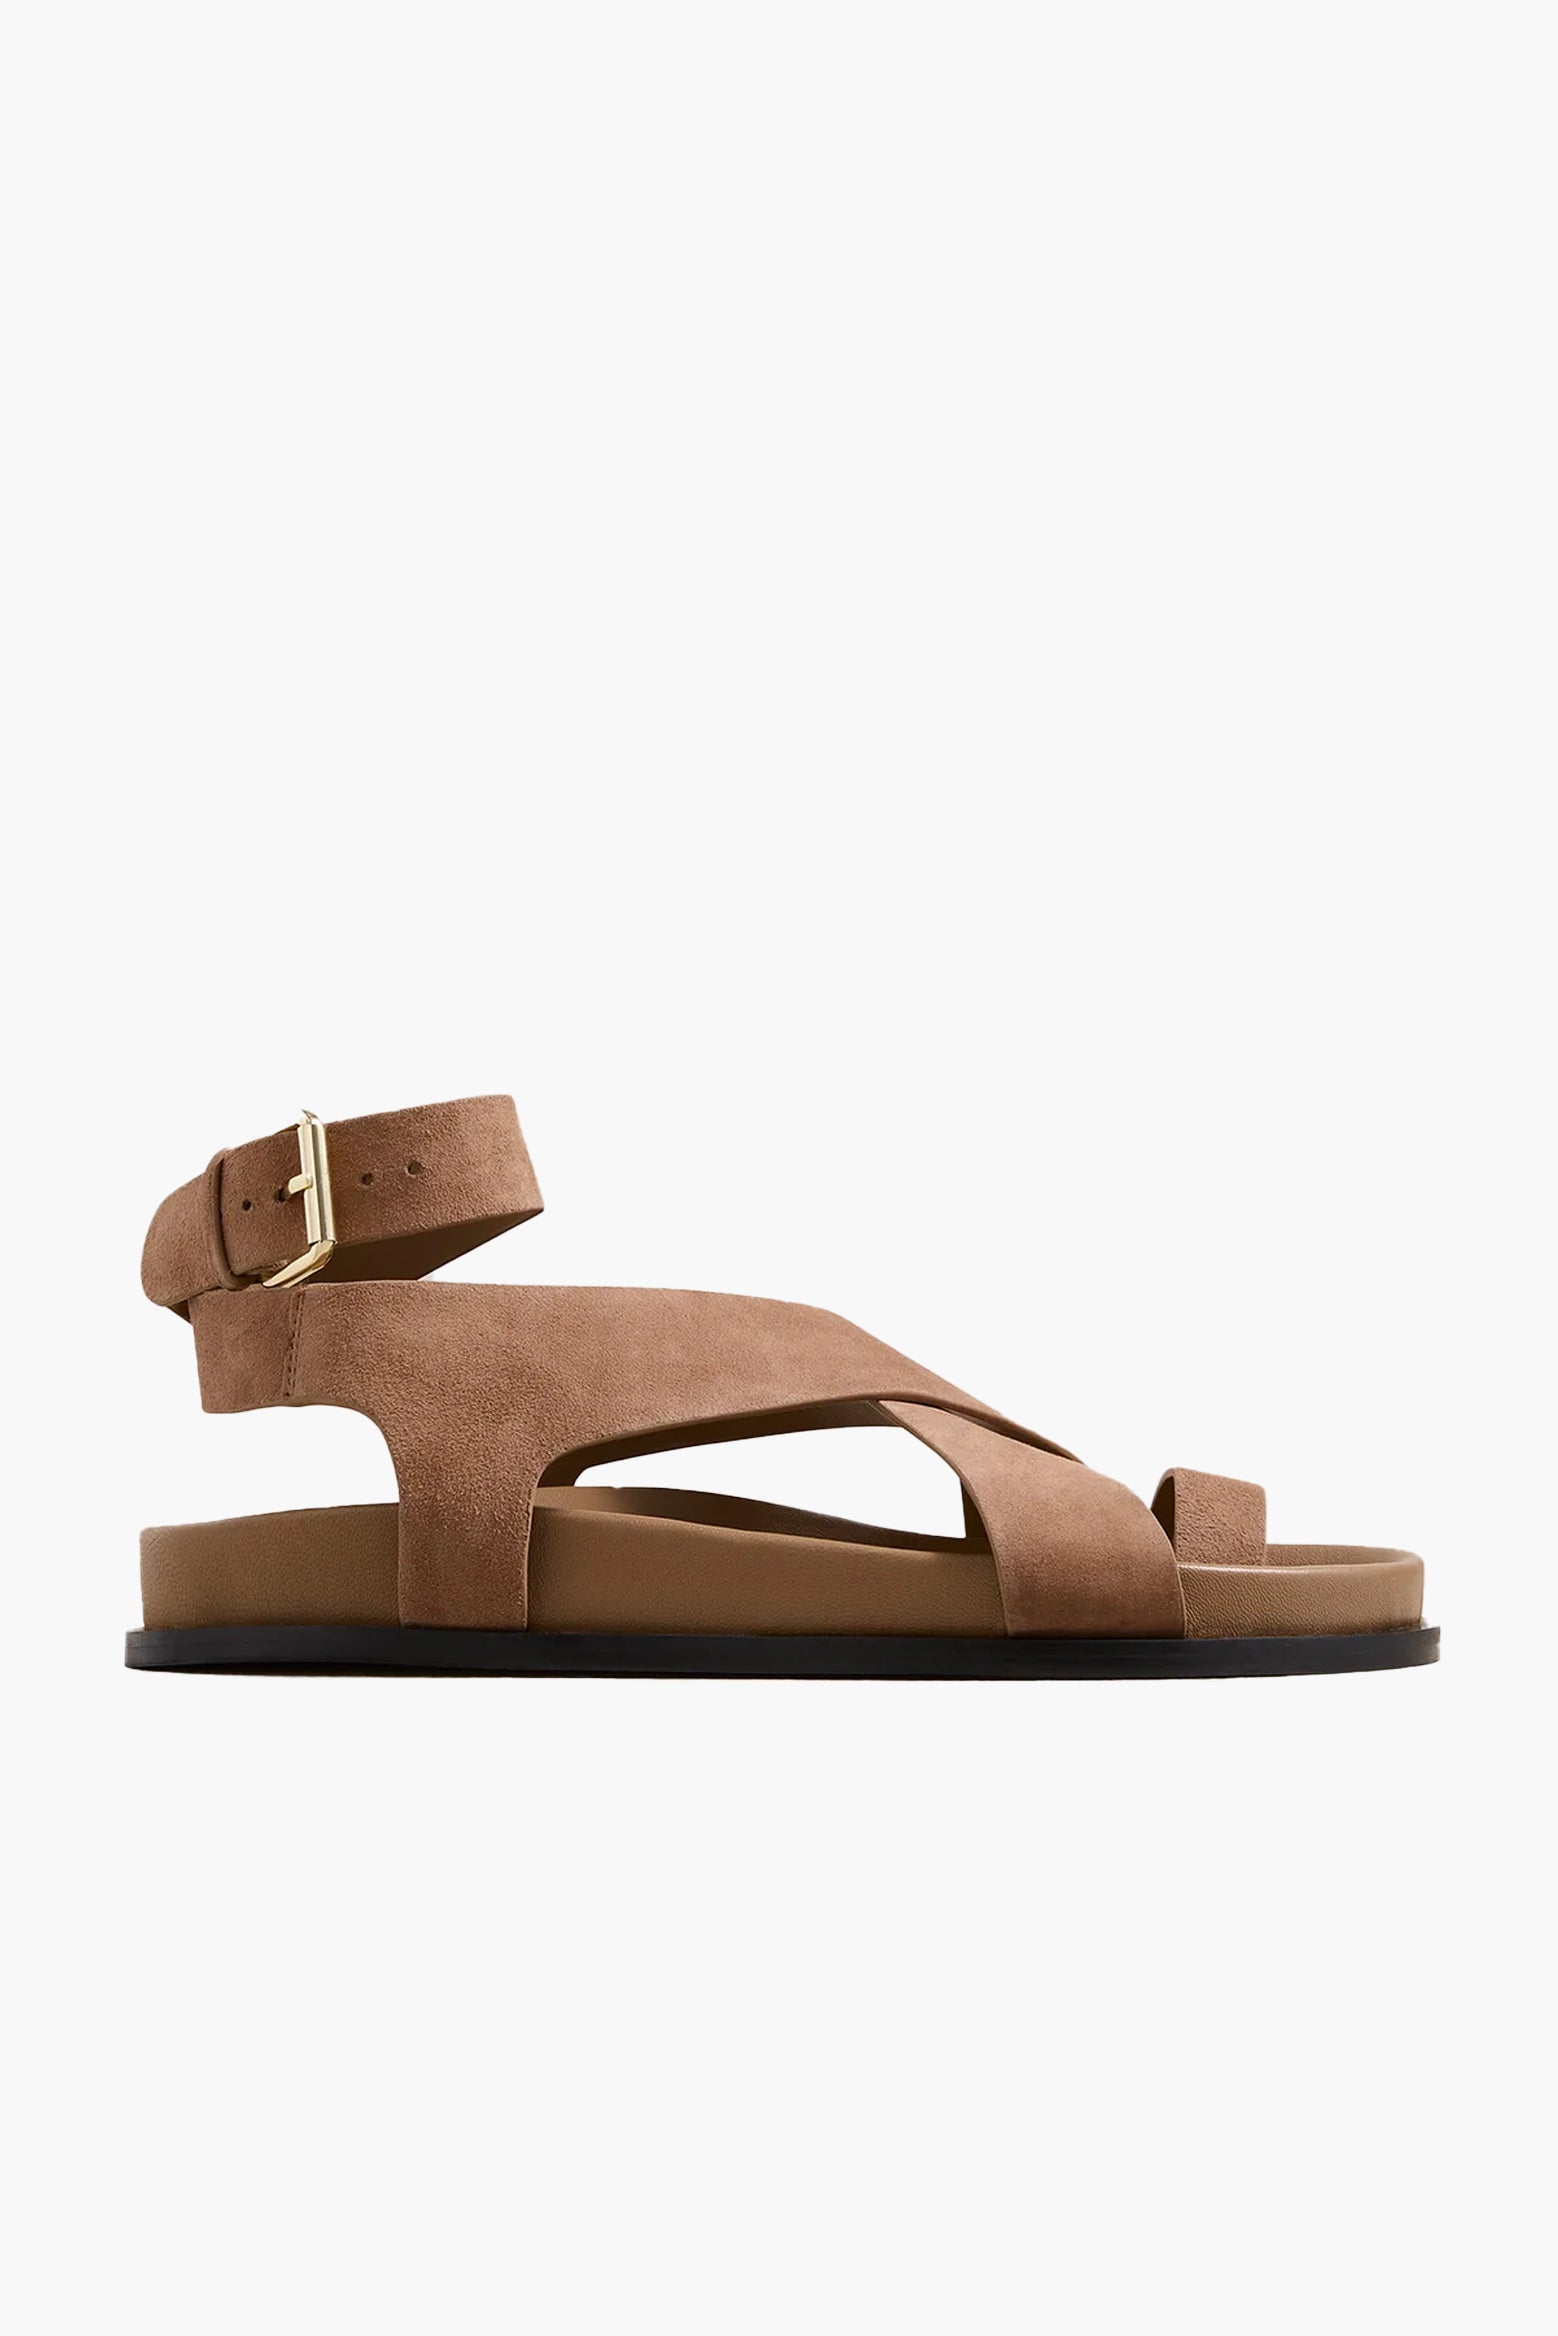 A.Emery Jalen Sandal in Nutmeg Suede available at The New Trend Australia.